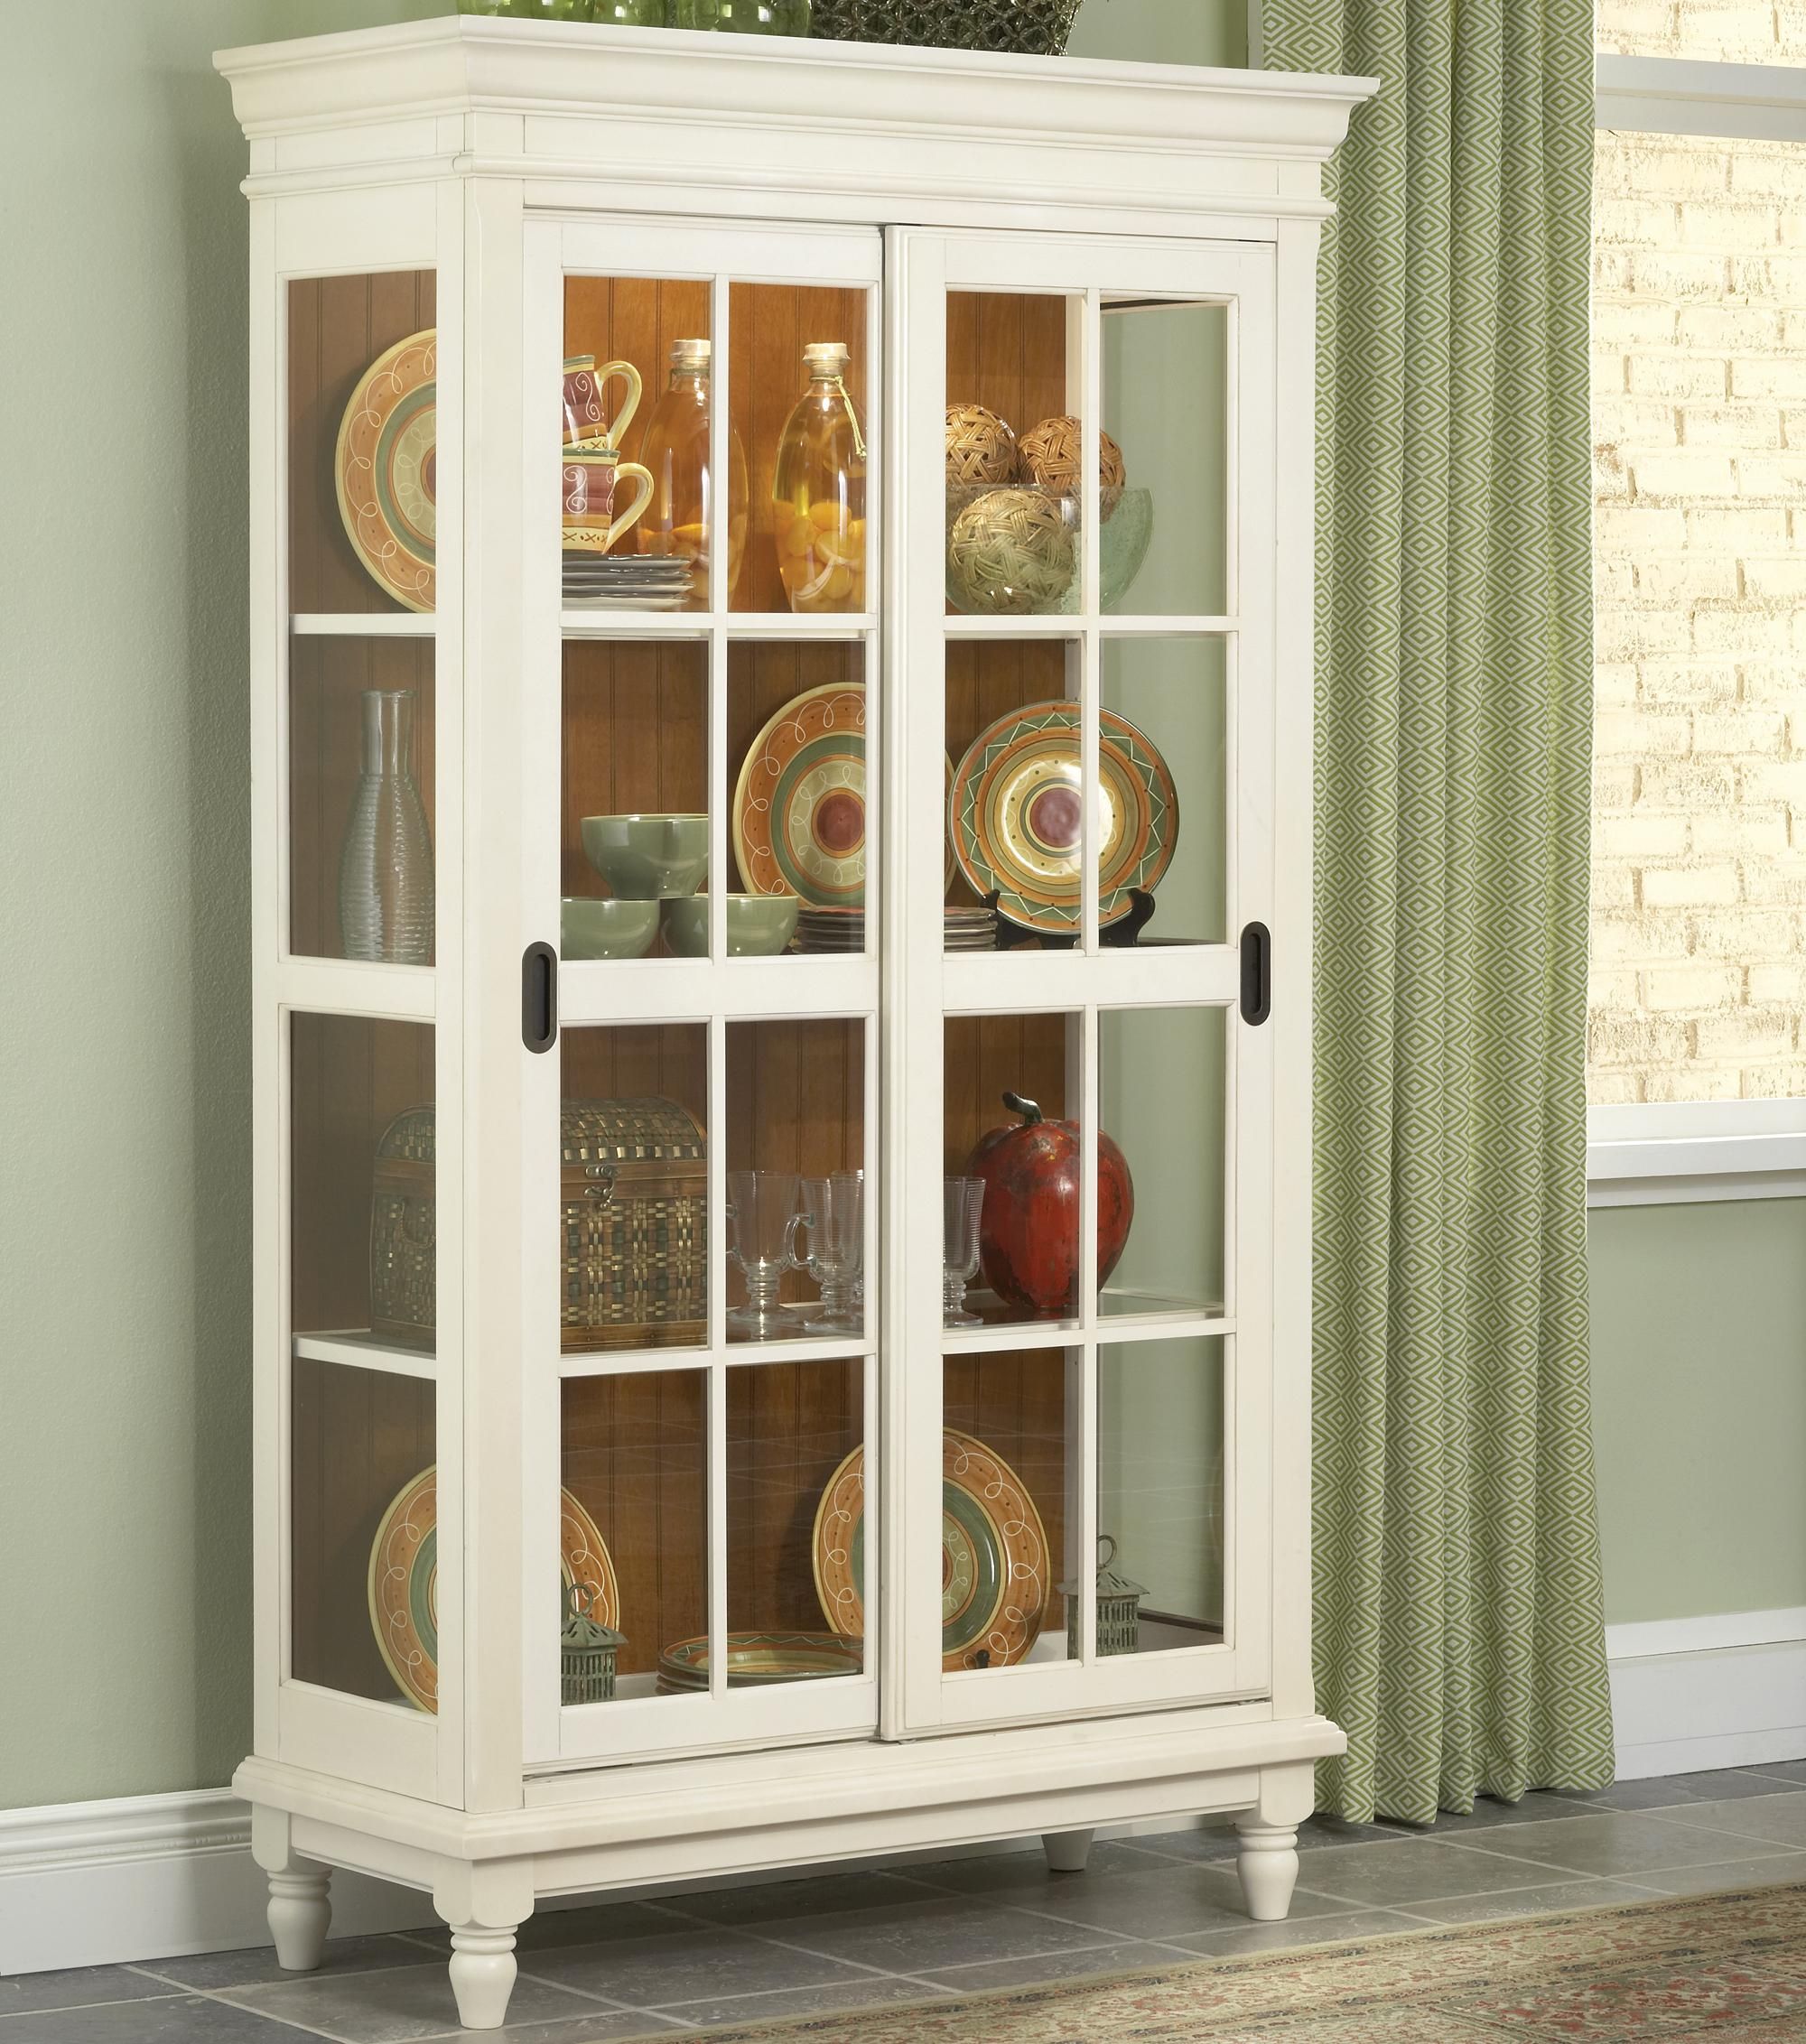 Curio Cabinet With Crown Moulding, Turned Feet, And Sliding Throughout Wooden Curio Buffets With Two Glass Doors (View 30 of 30)